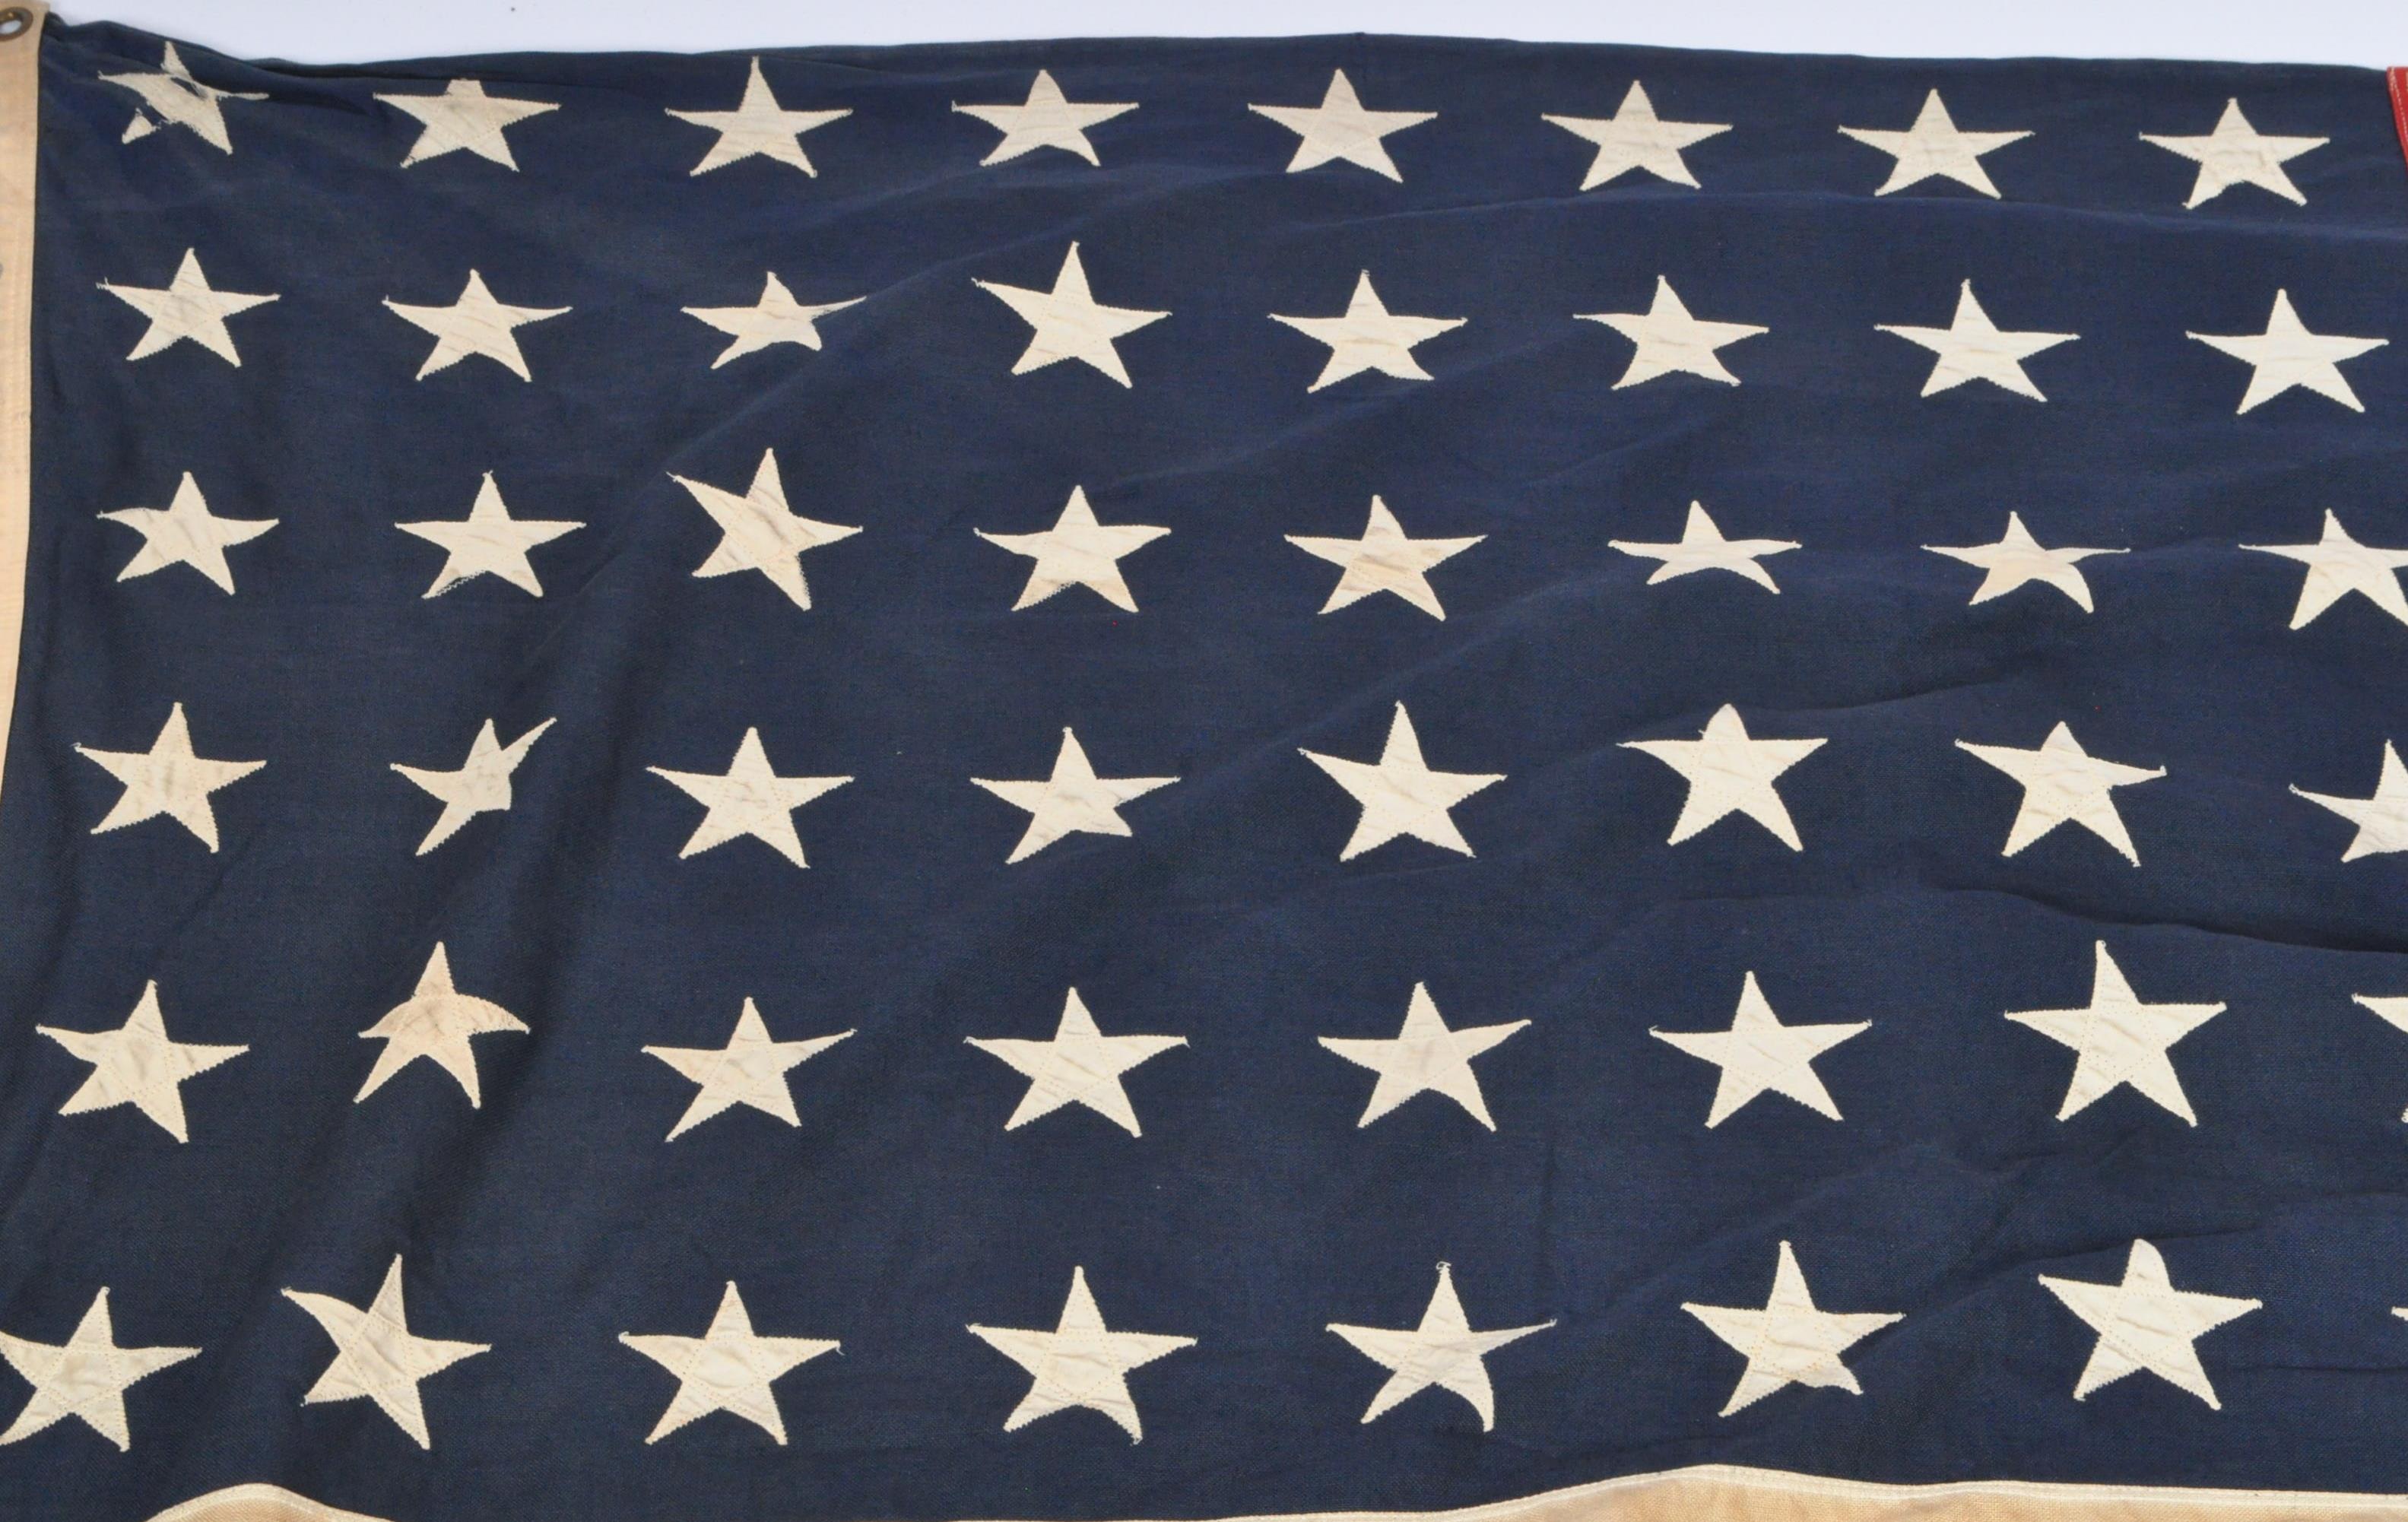 WWII SECOND WORLD WAR INTEREST - US NAVY FLAG - LCL 87 - Image 2 of 4